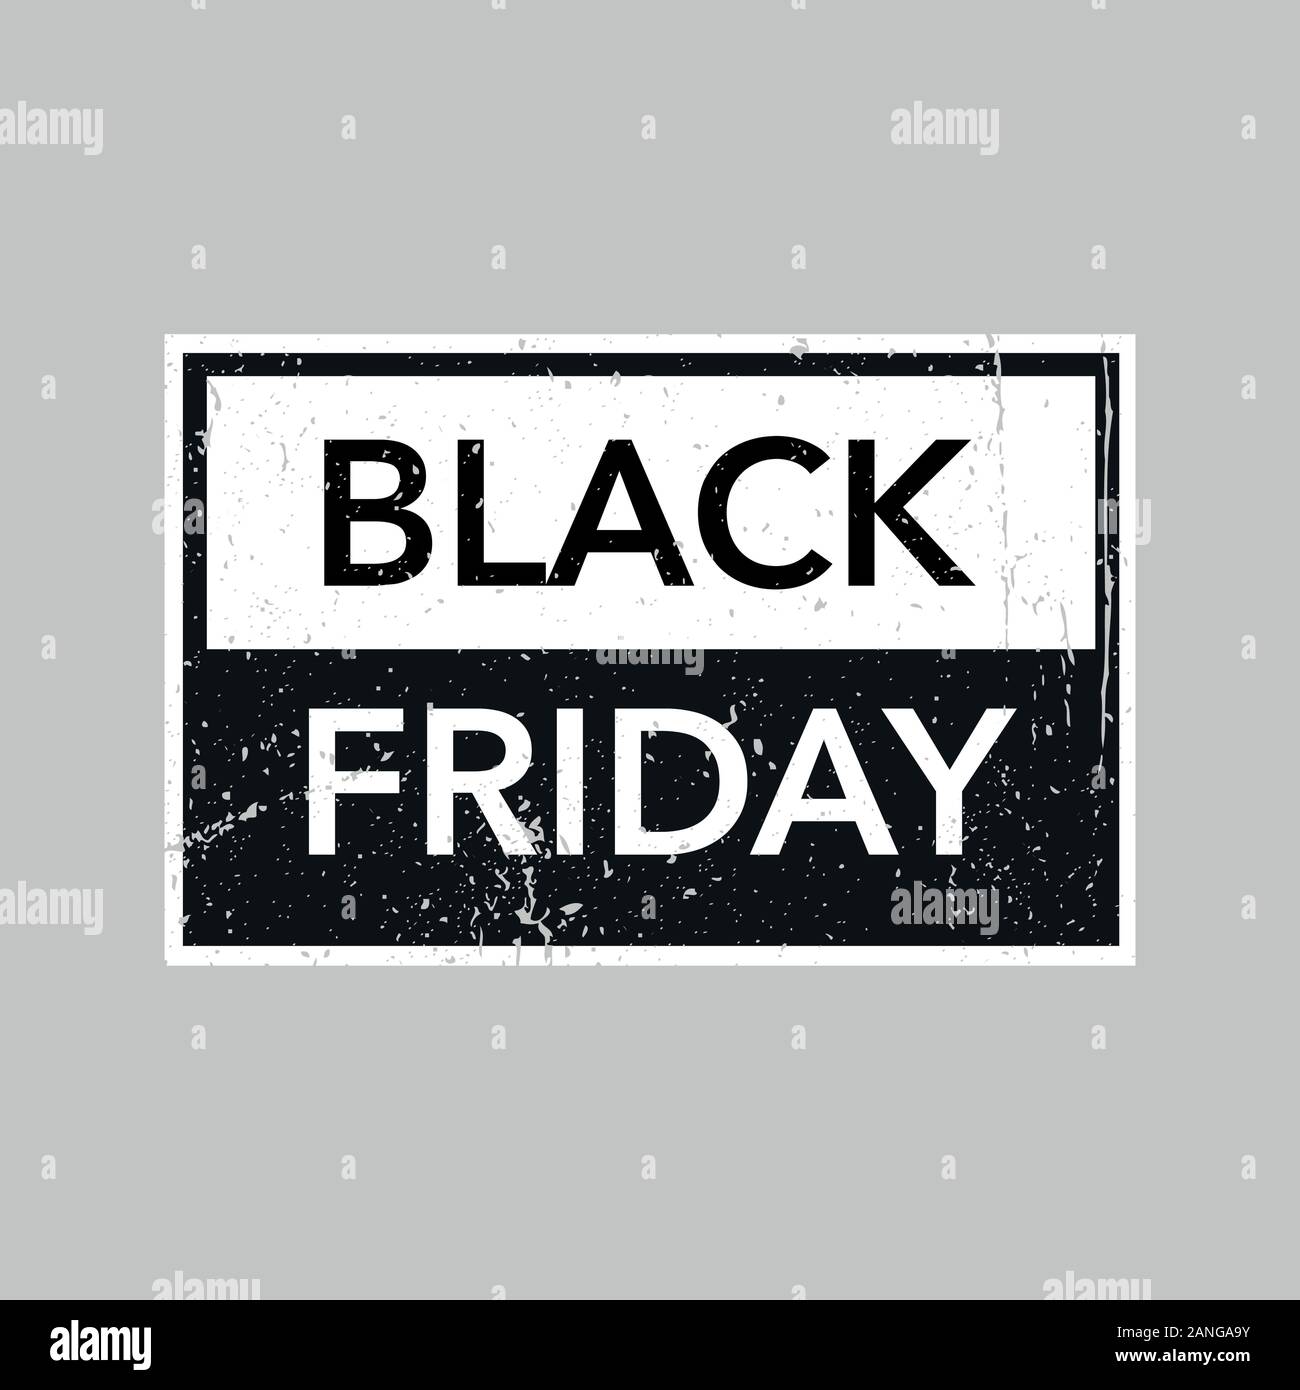 Black friday label stamp isolated on white background for promotion. Grunge Vector illustration EPS10 Stock Vector